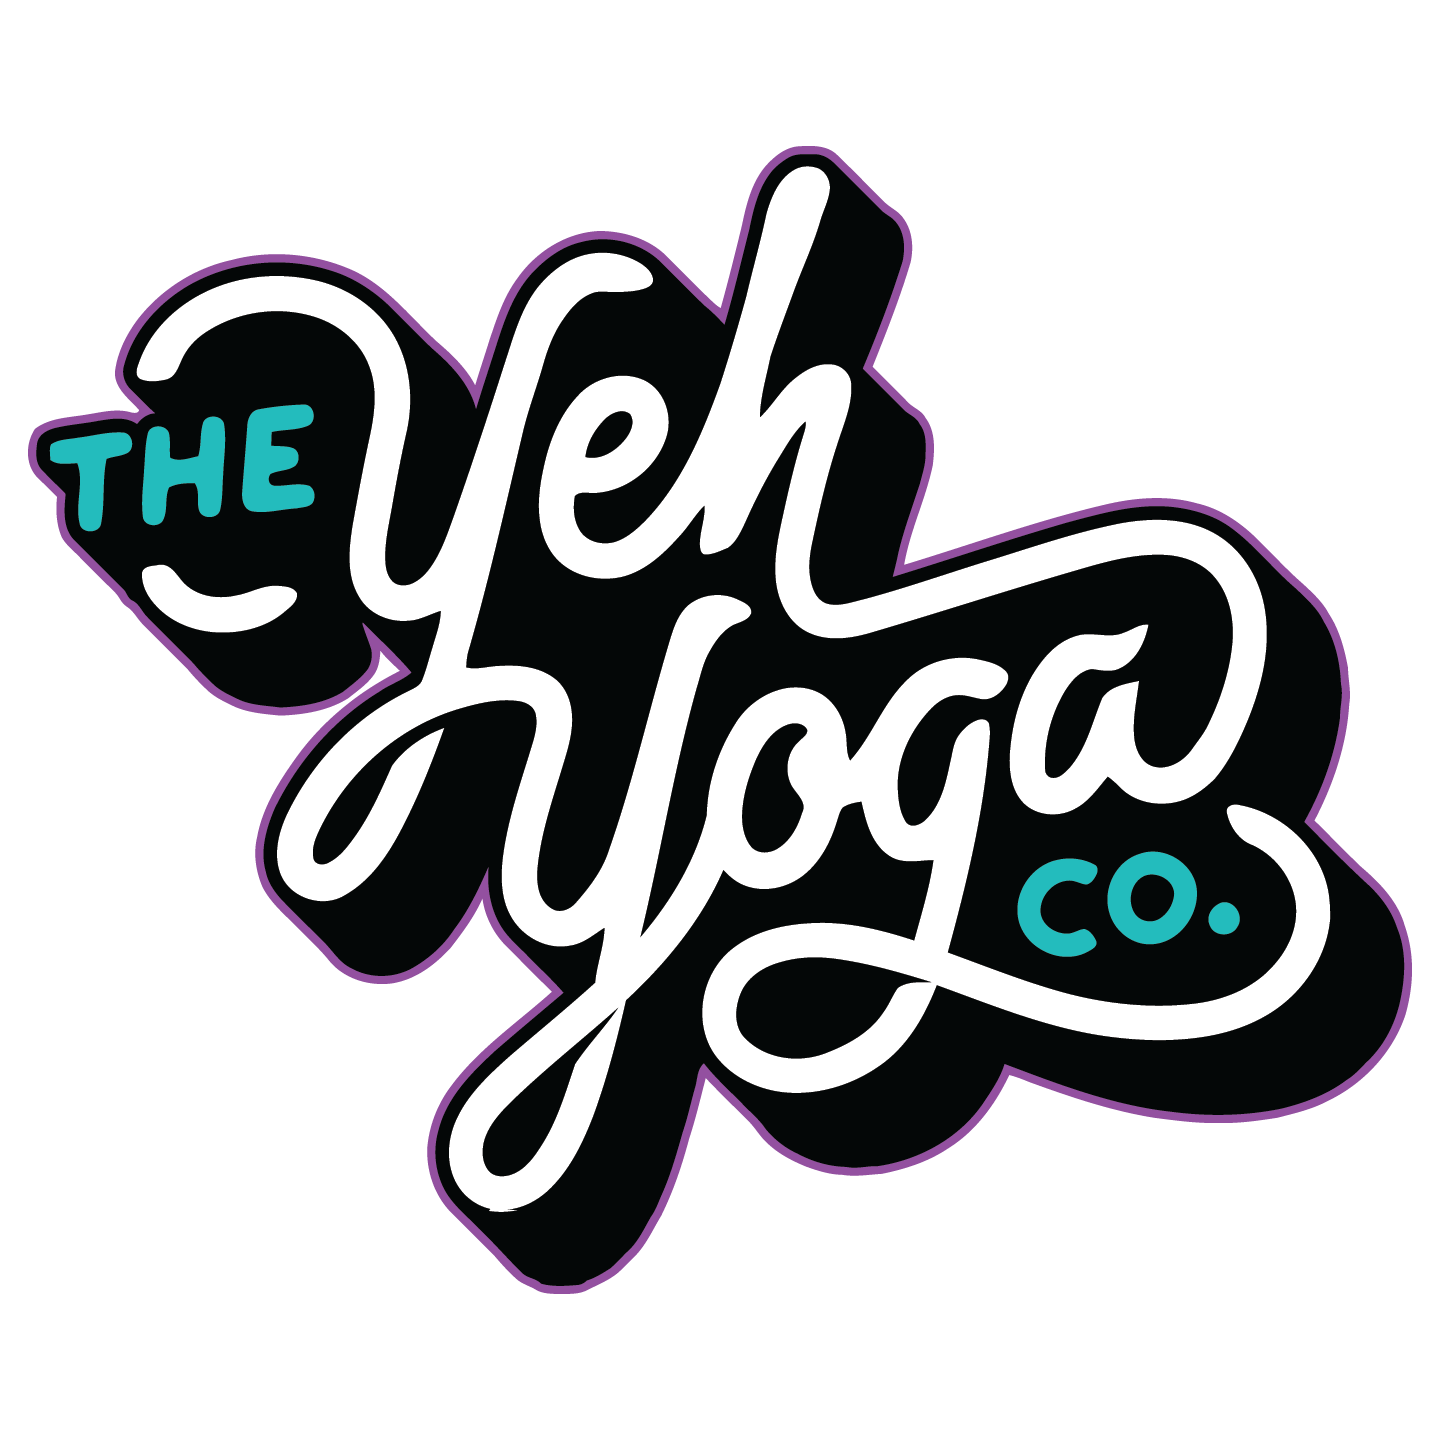 The Yeh Yoga Co.